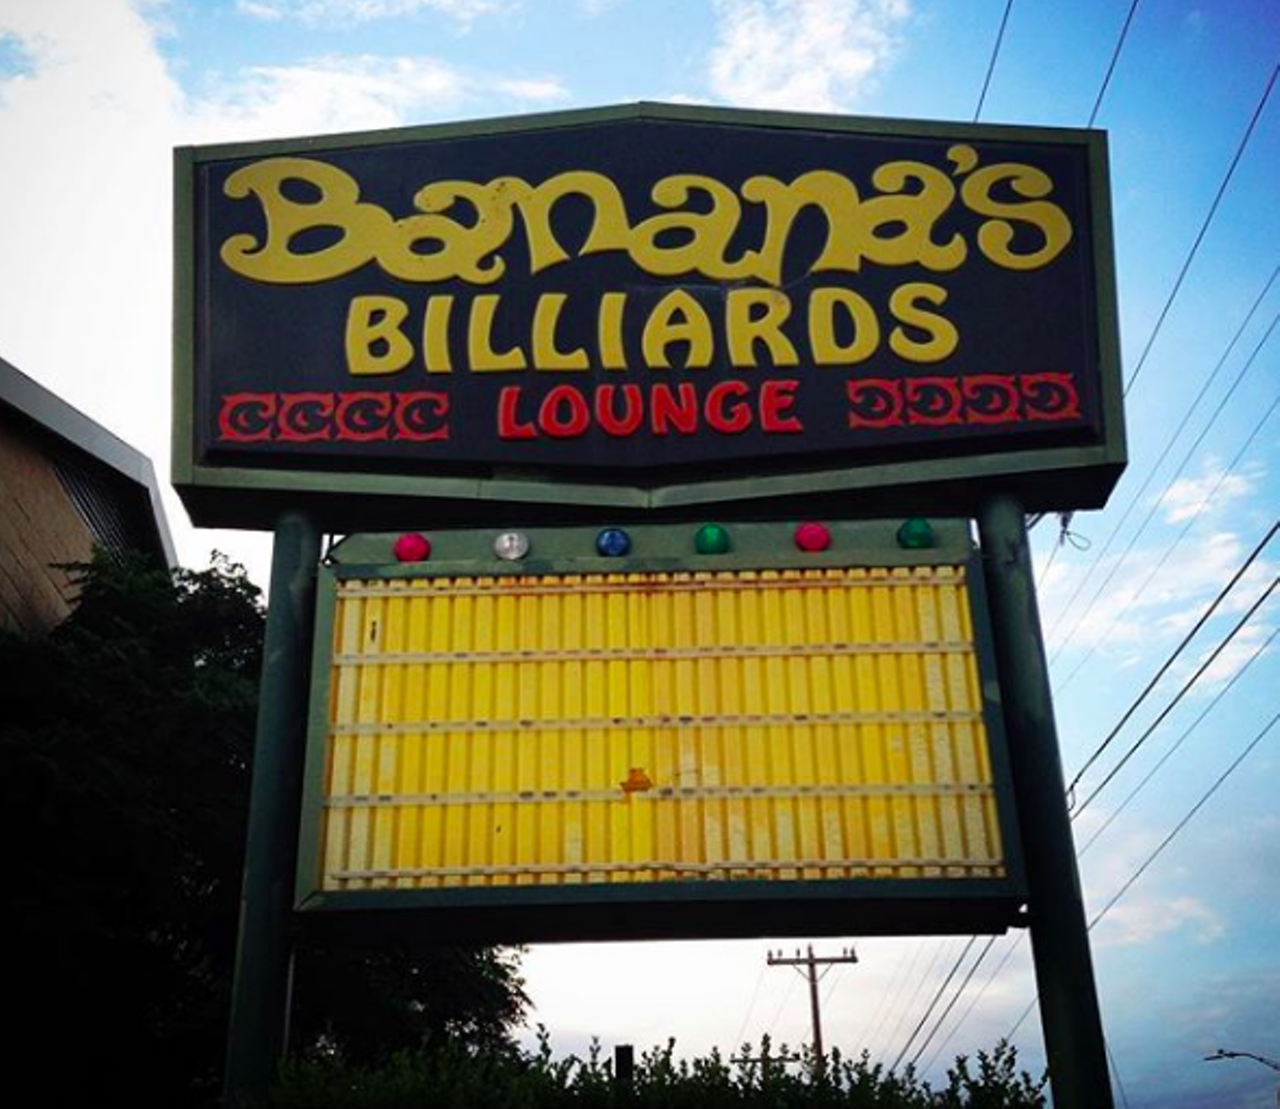 Bananas Billiards
2003 San Pedro Ave, (210) 226-2627, facebook.com/BananasBilliards
Whether you stop by for a game of billiards or just want to get your drink on, you can post up at Bananas beginning at 2 p.m. daily.
Photo via Instagram / _corpser_